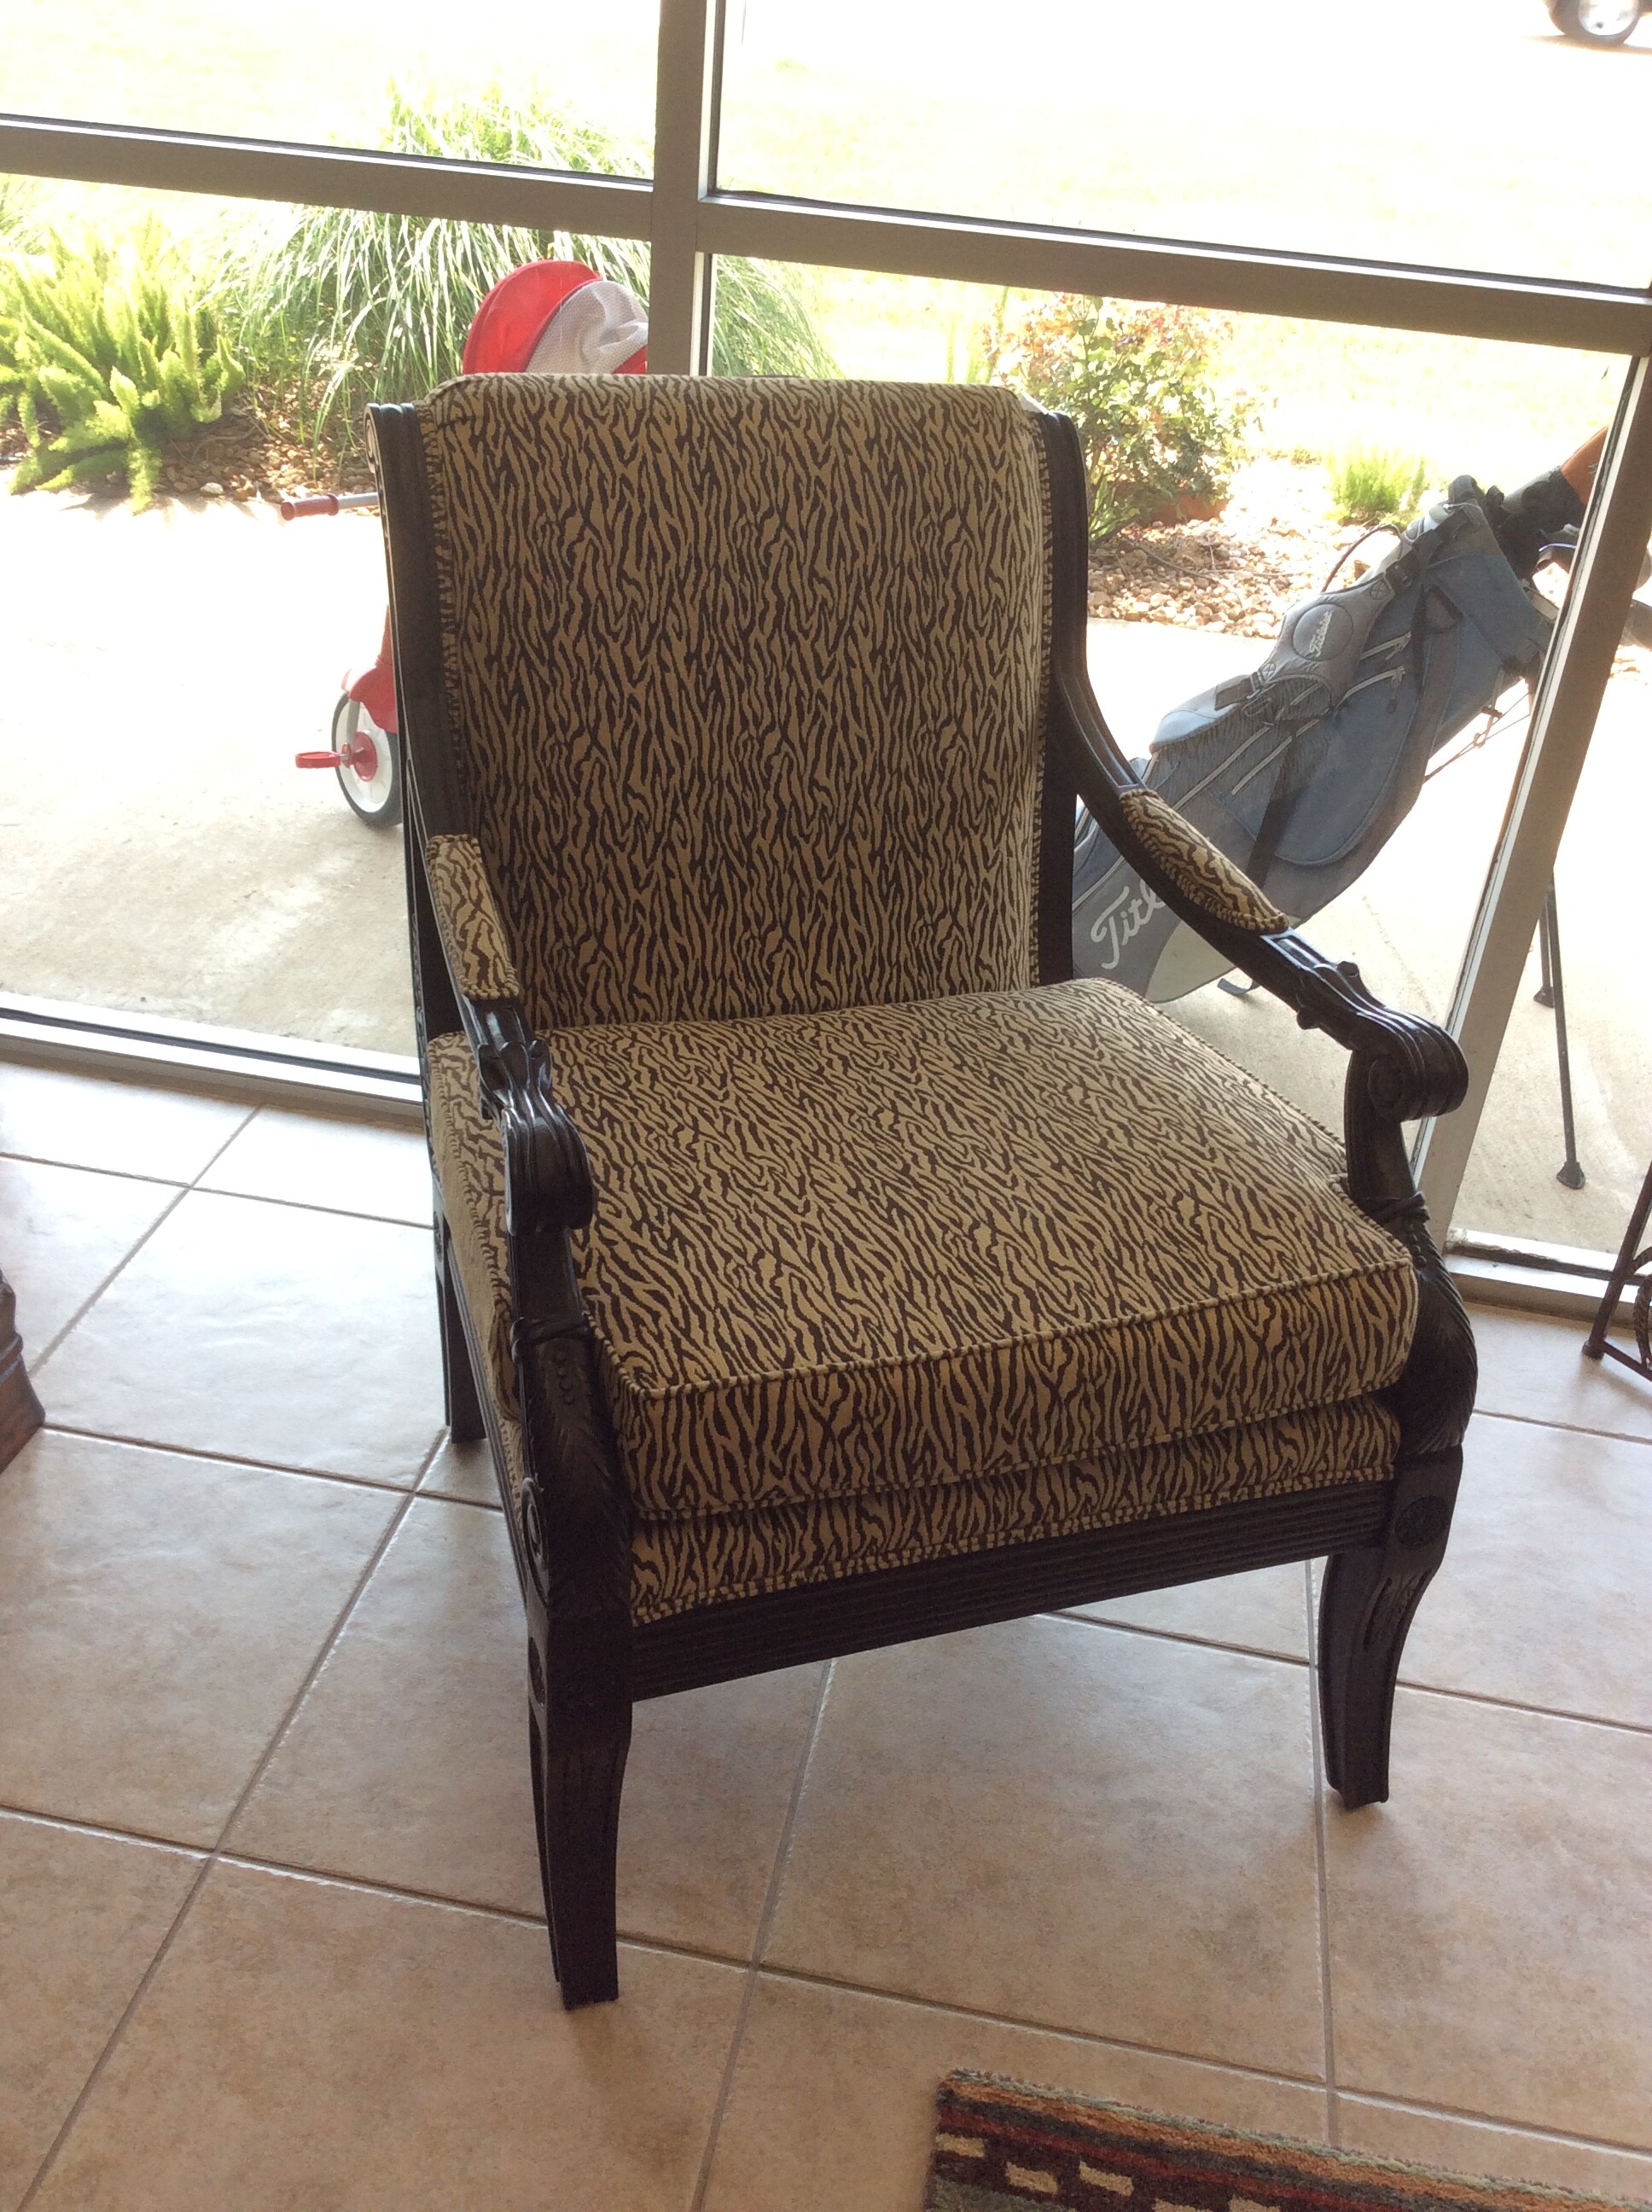 This is a Brown and Cream Zebra Accent Chair. This Chair has Dark Wood Stained detailed arm and foot rails.